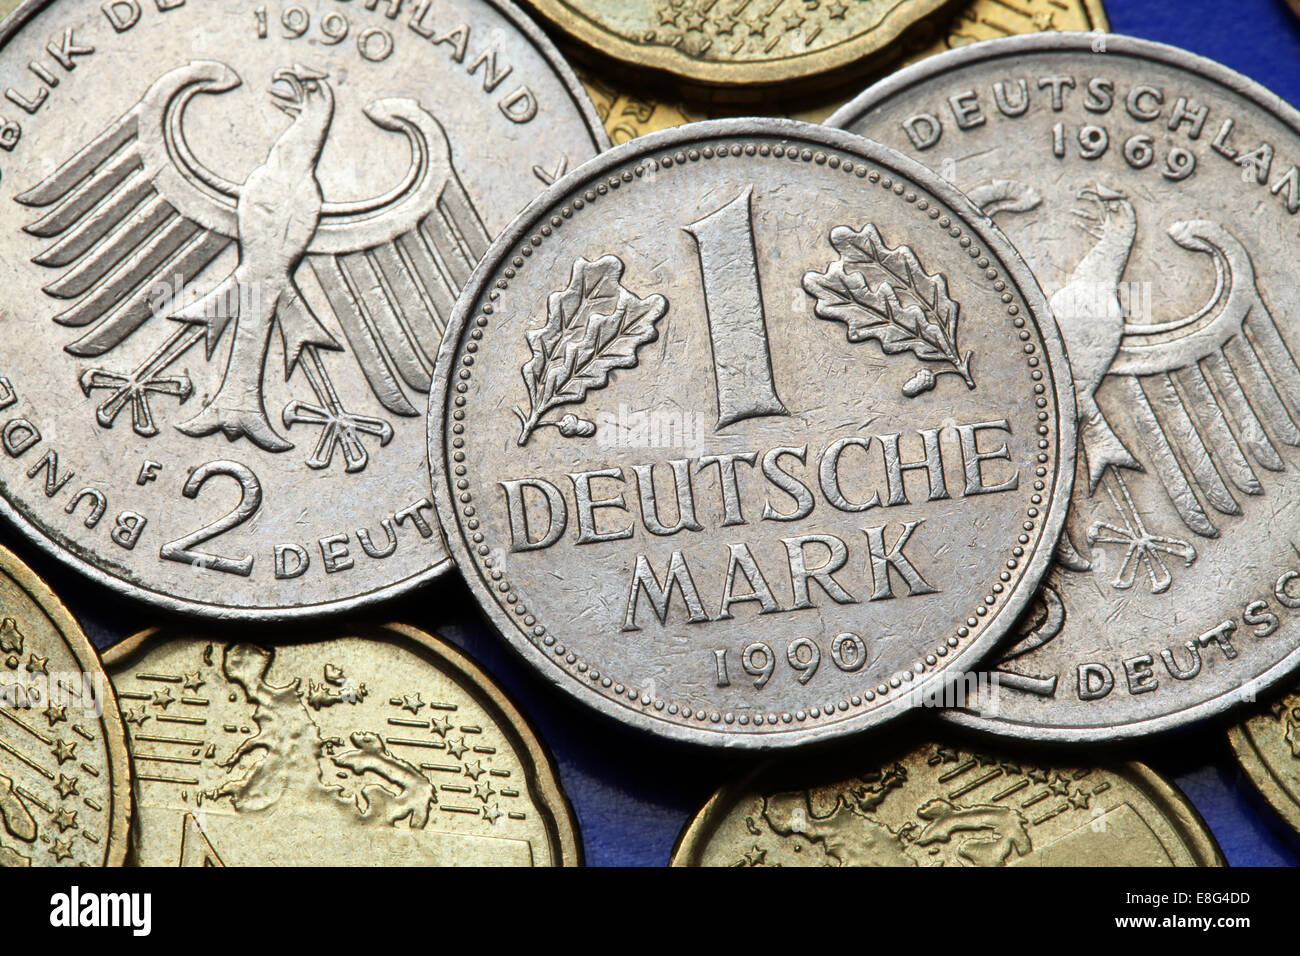 Coins of Germany. Old Deutsche Mark coins. Stock Photo